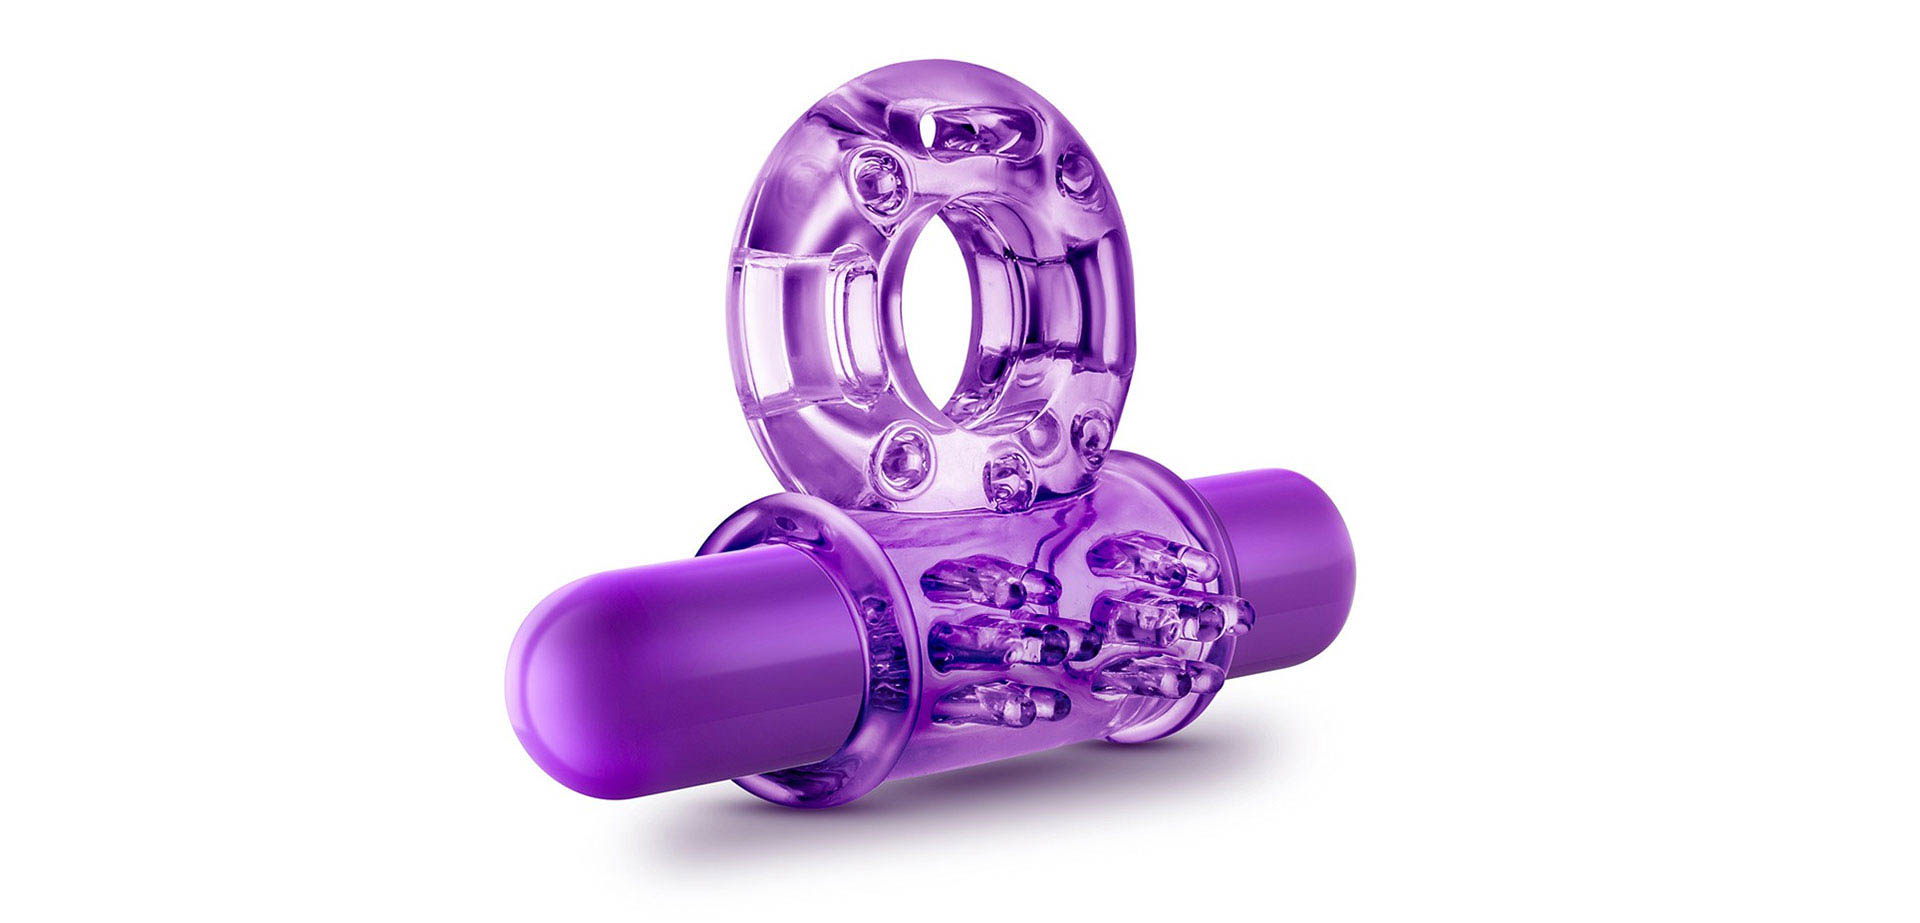 Soft Stretchy Vibrating Cock Ring.